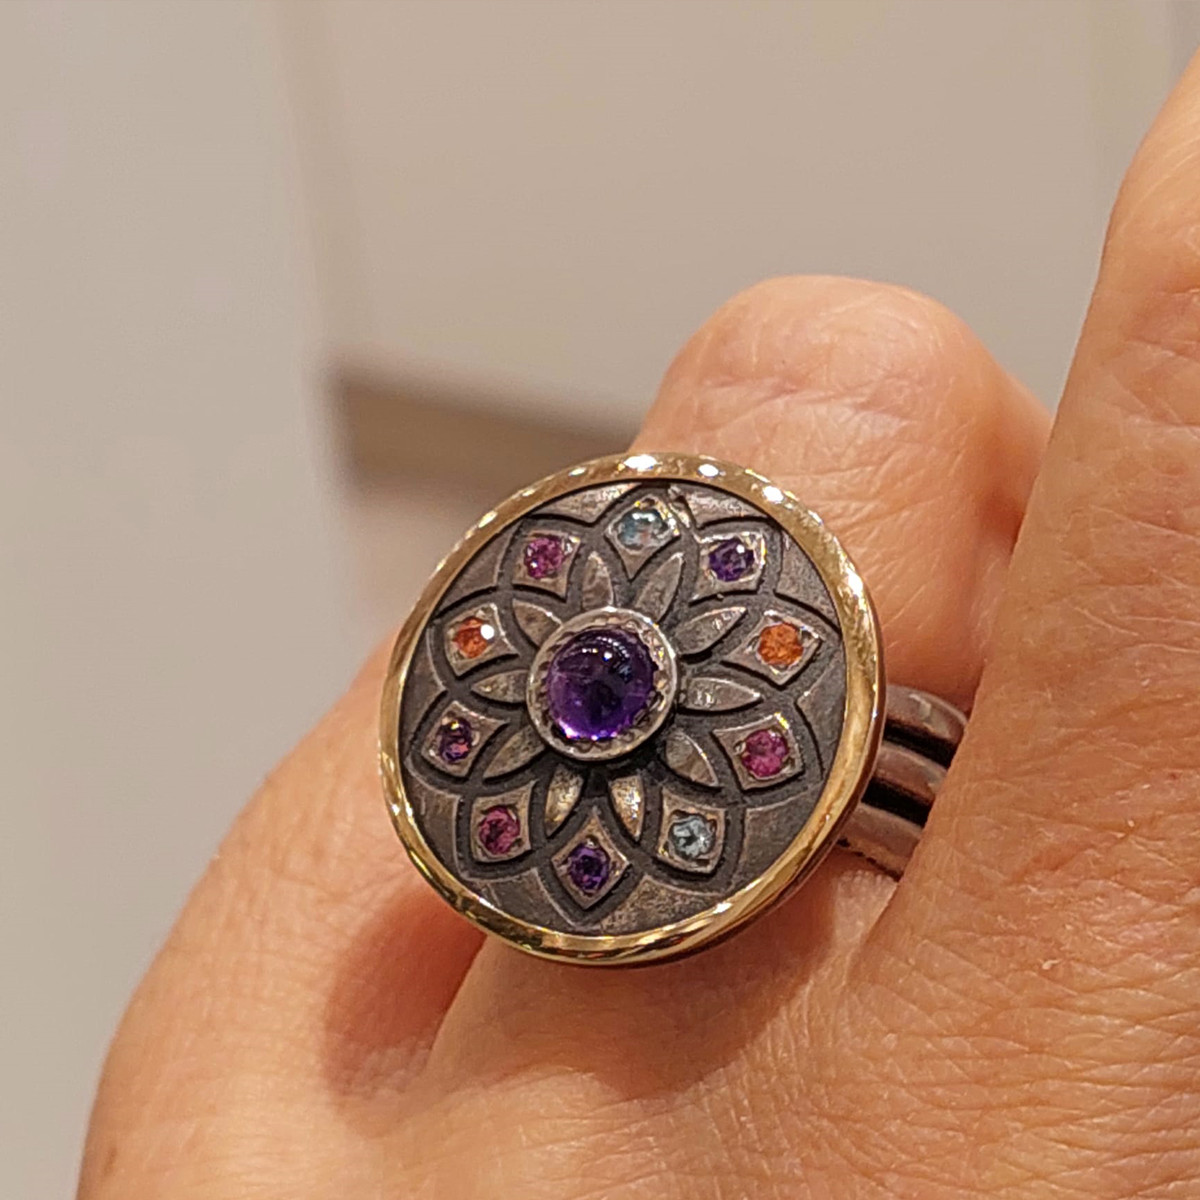 STERLING SILVER AND GOLD RING WITH COLORED STONES